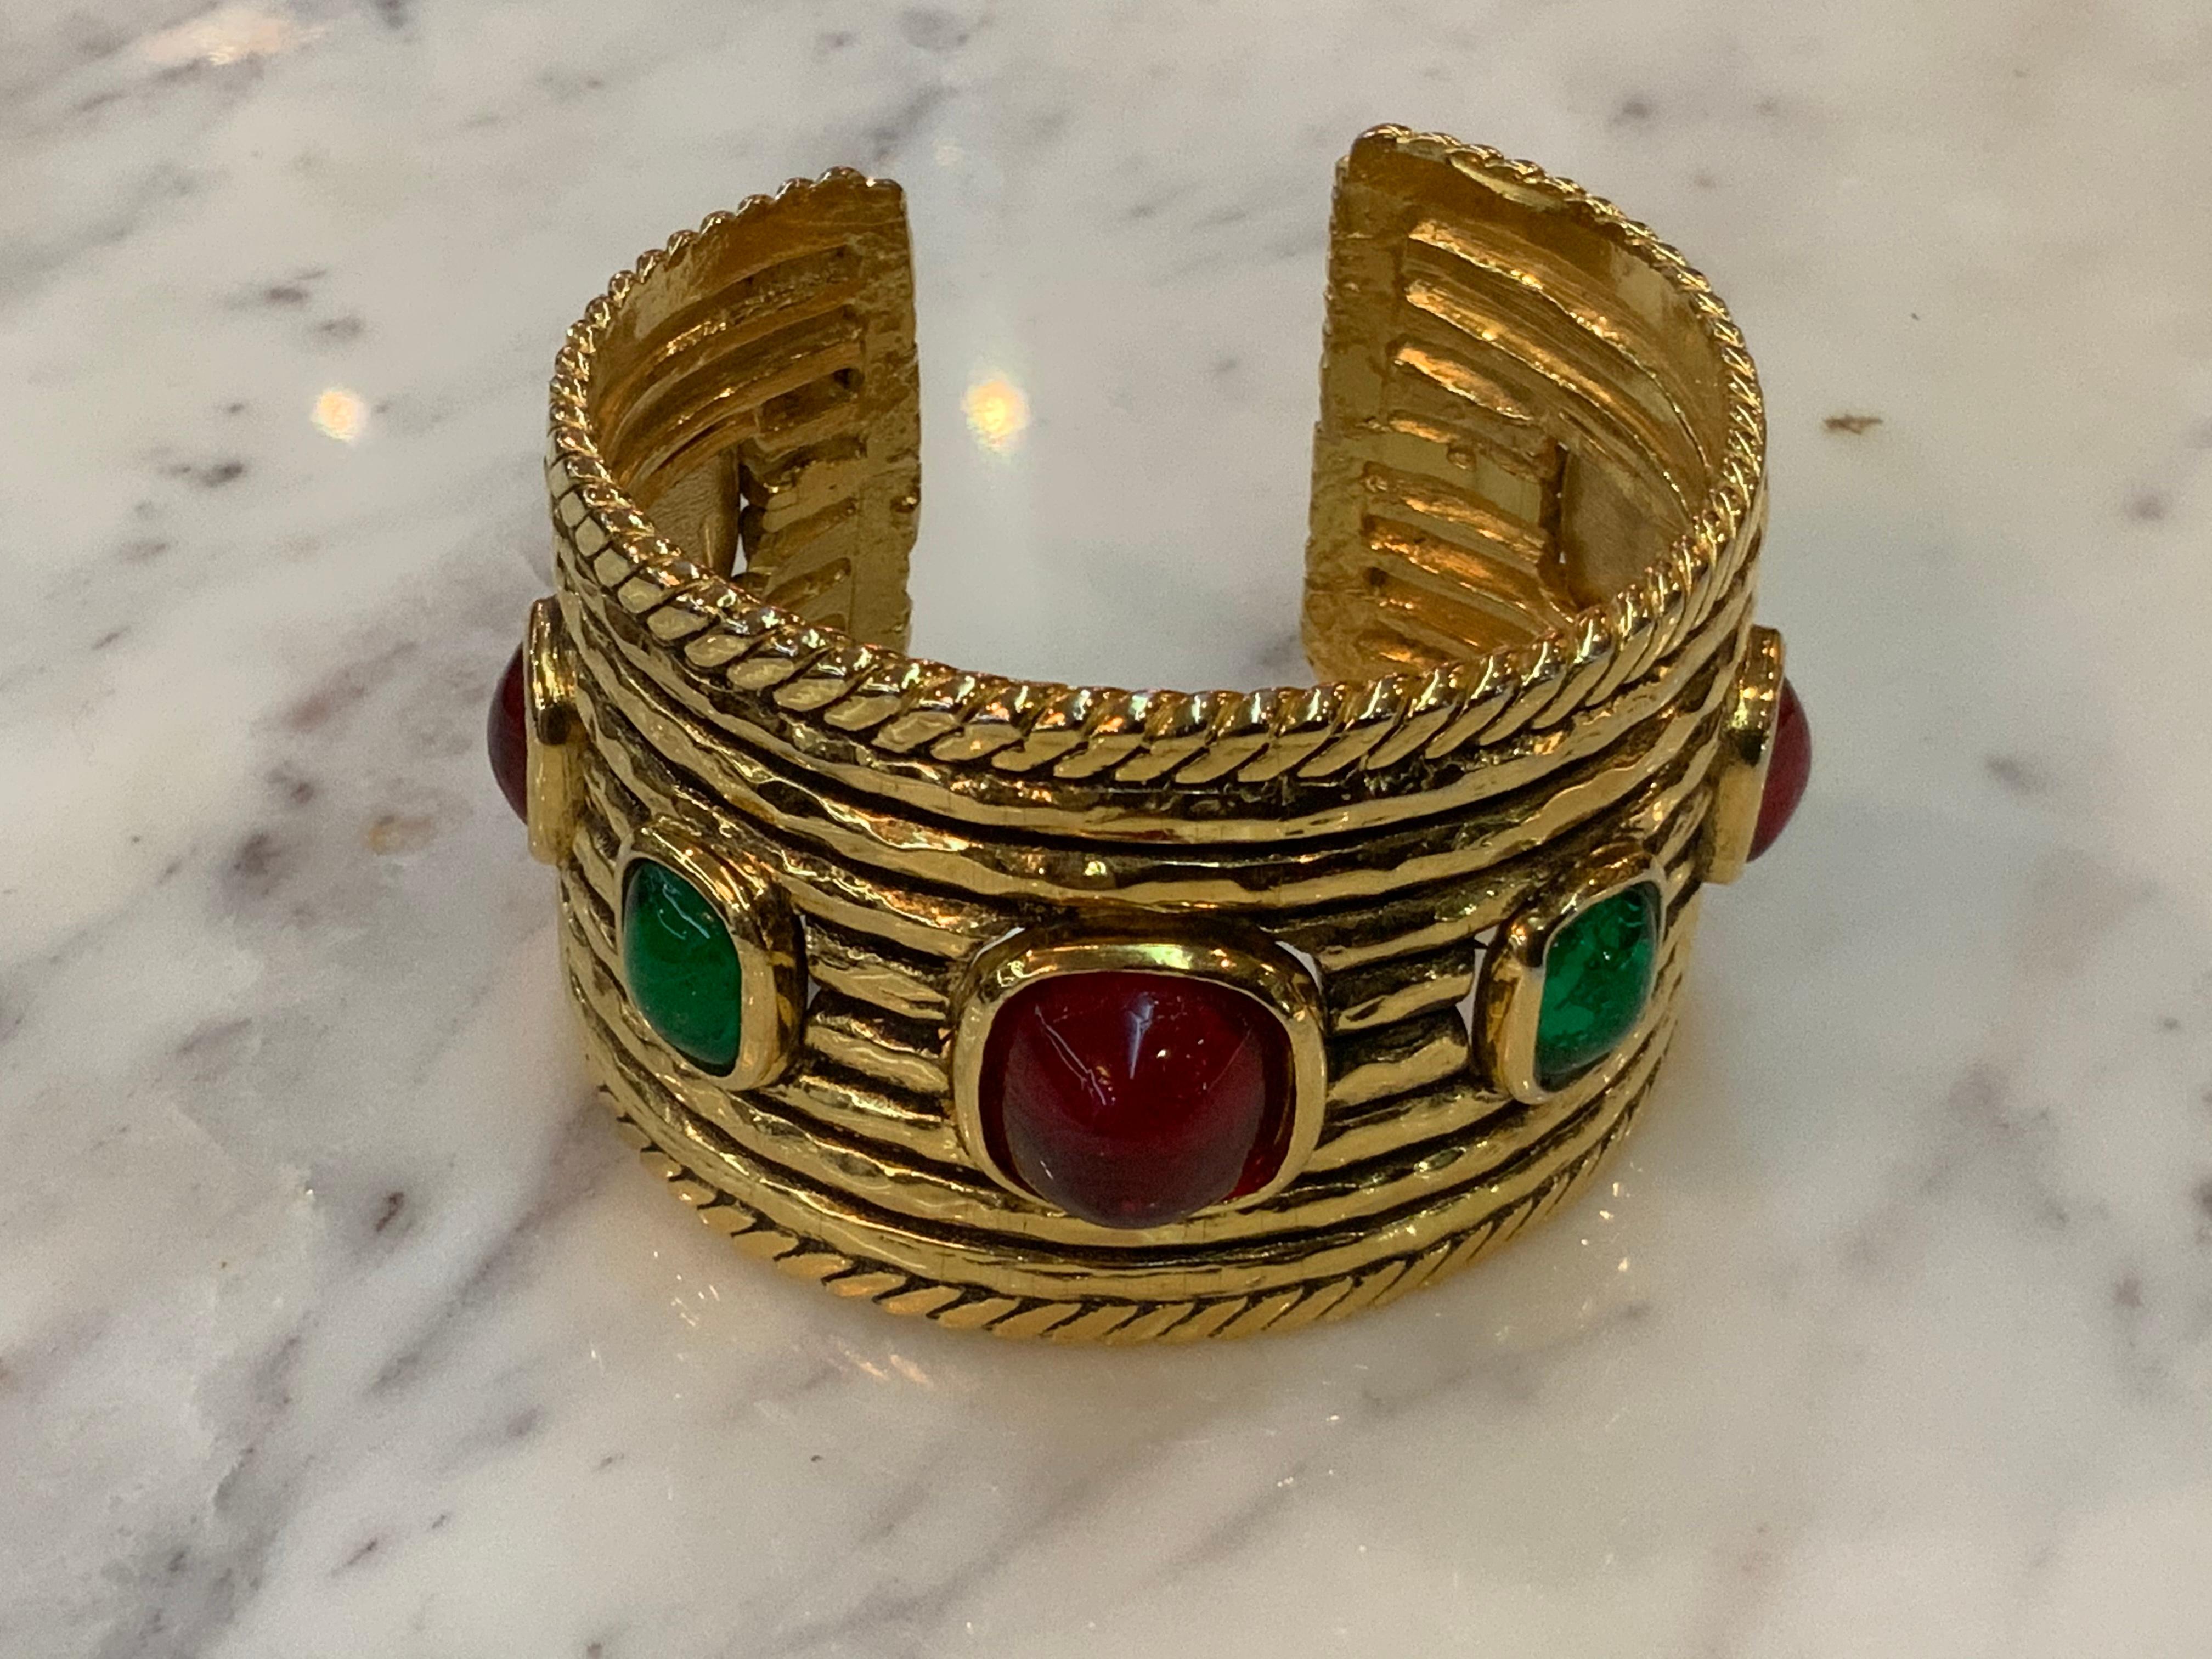 Vintage 1984 Chanel Wide Gold Cuff with Red and Green Gripoix Stones In Excellent Condition For Sale In Carmel, CA